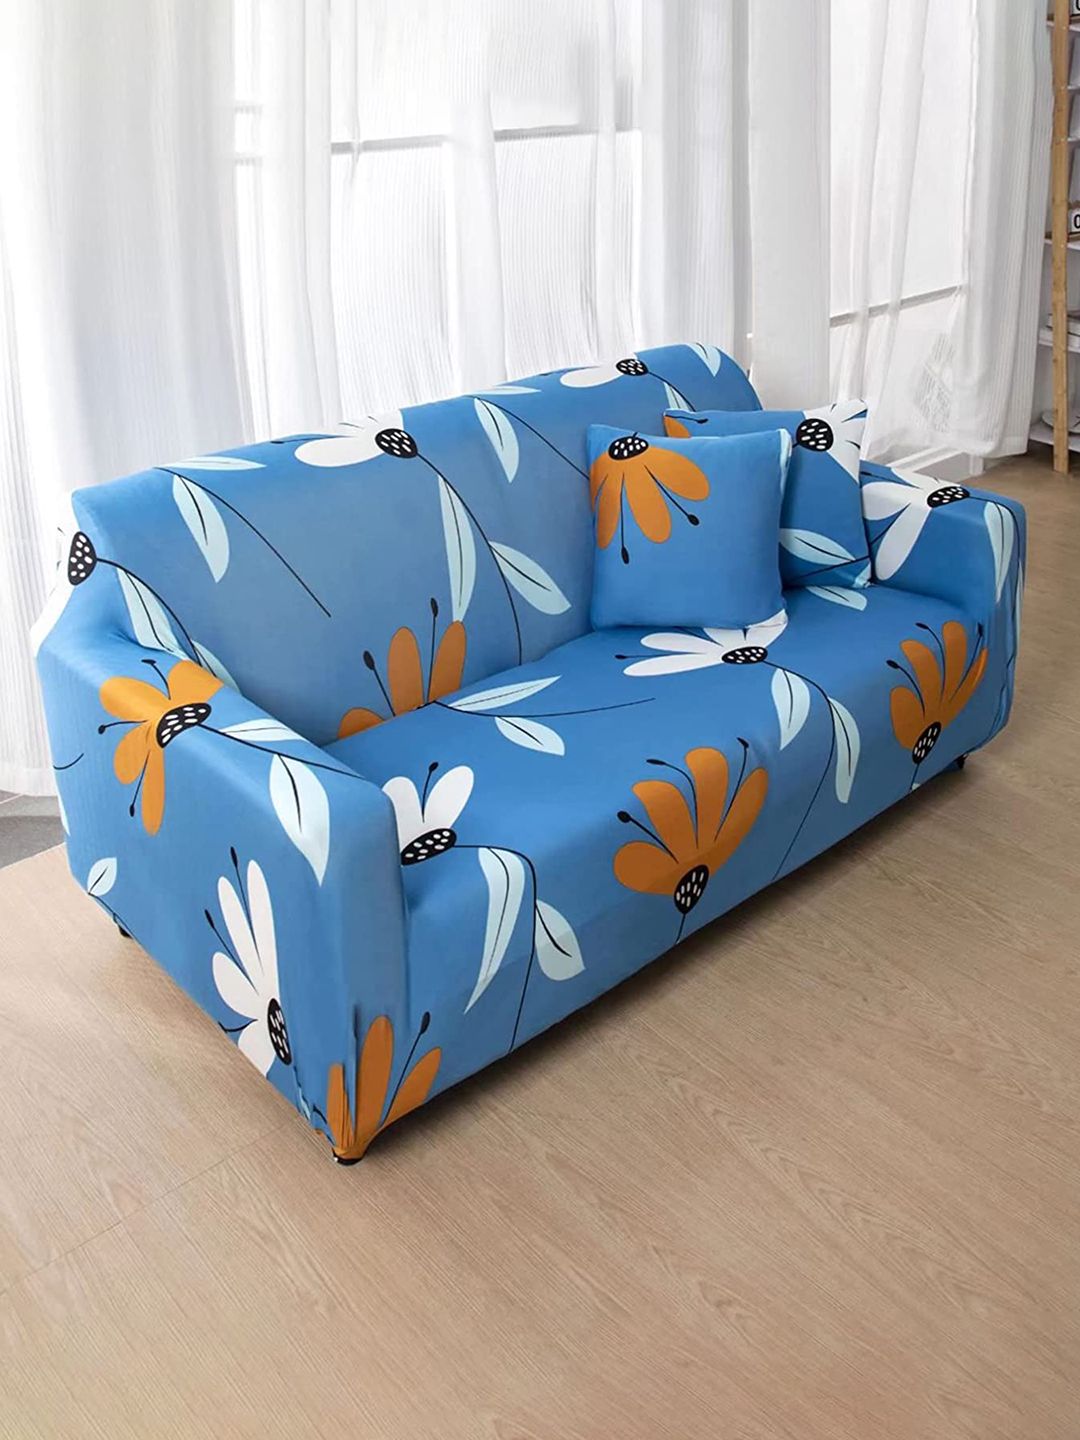 HOUSE OF QUIRK Blue Floral Printed 4-Seater Flexible Stretch Sofa Slipcover Price in India